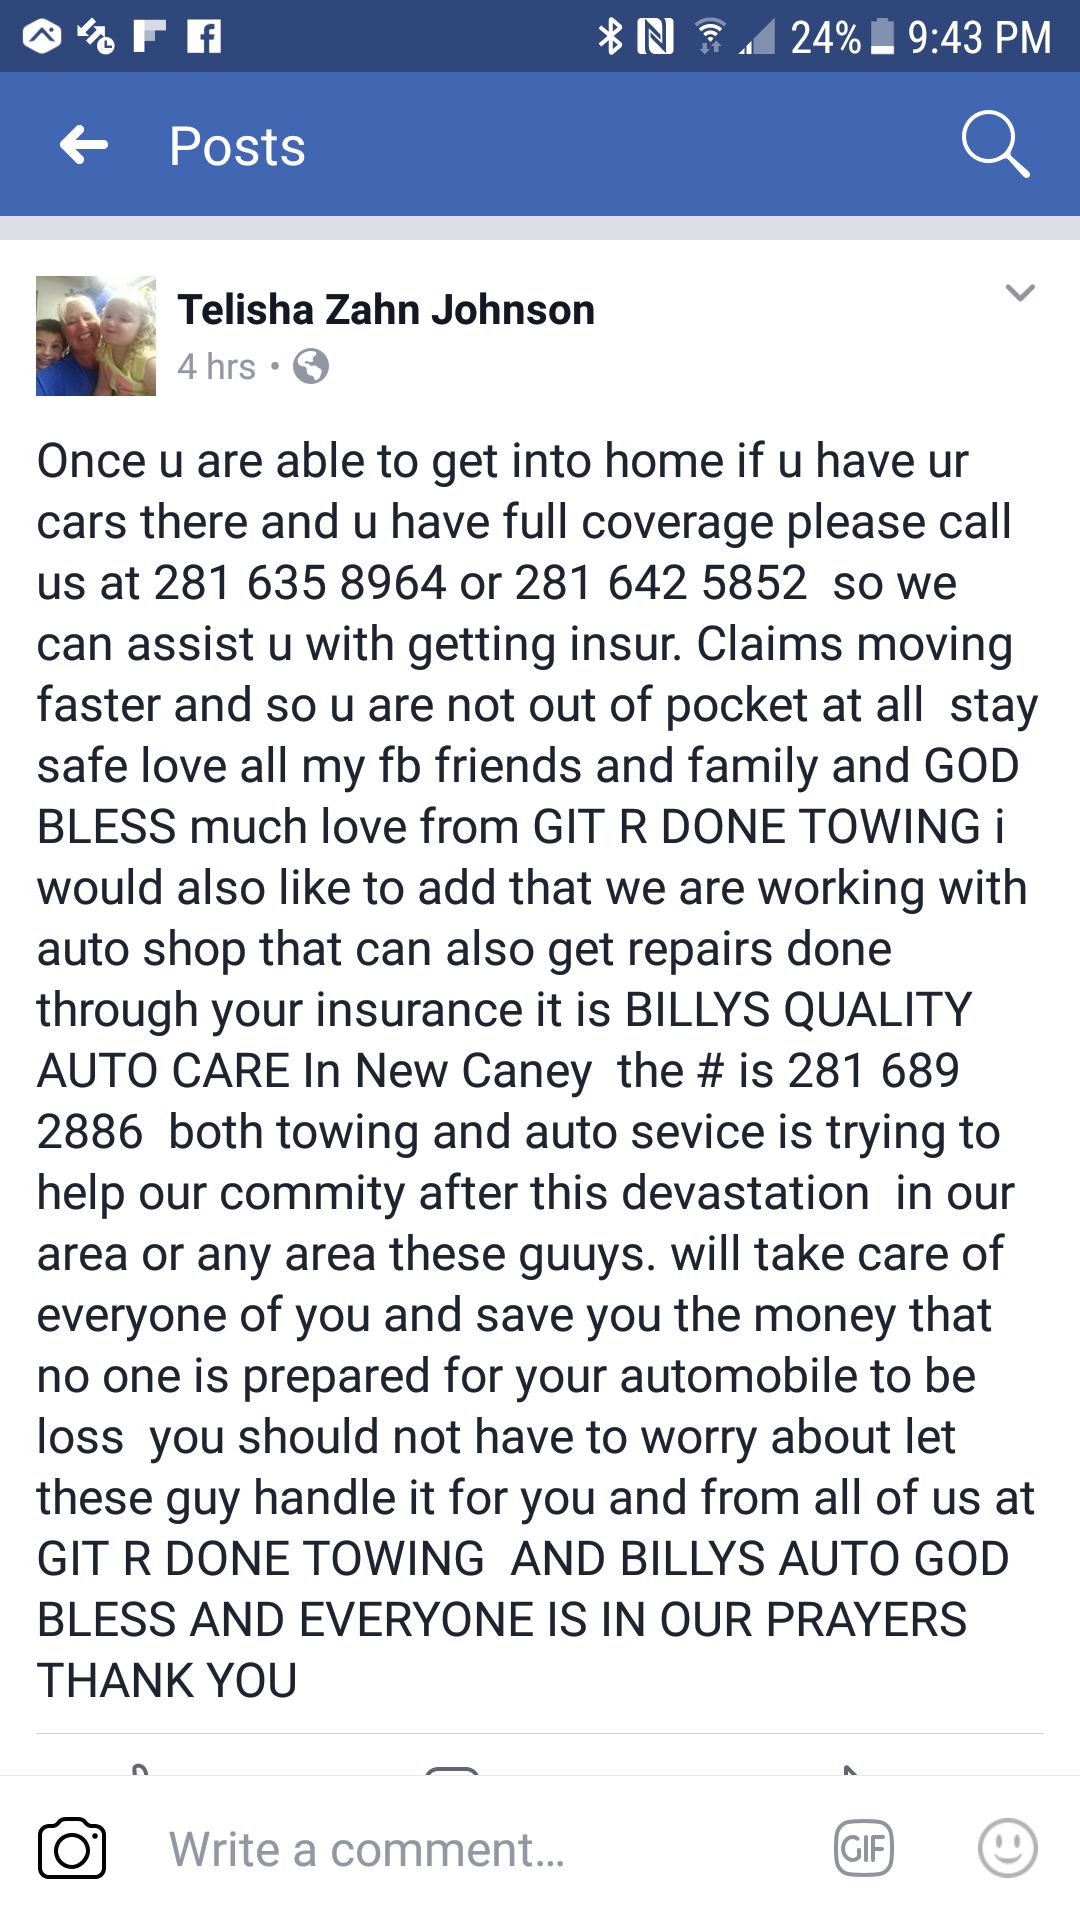 Billy's Quality Auto Care